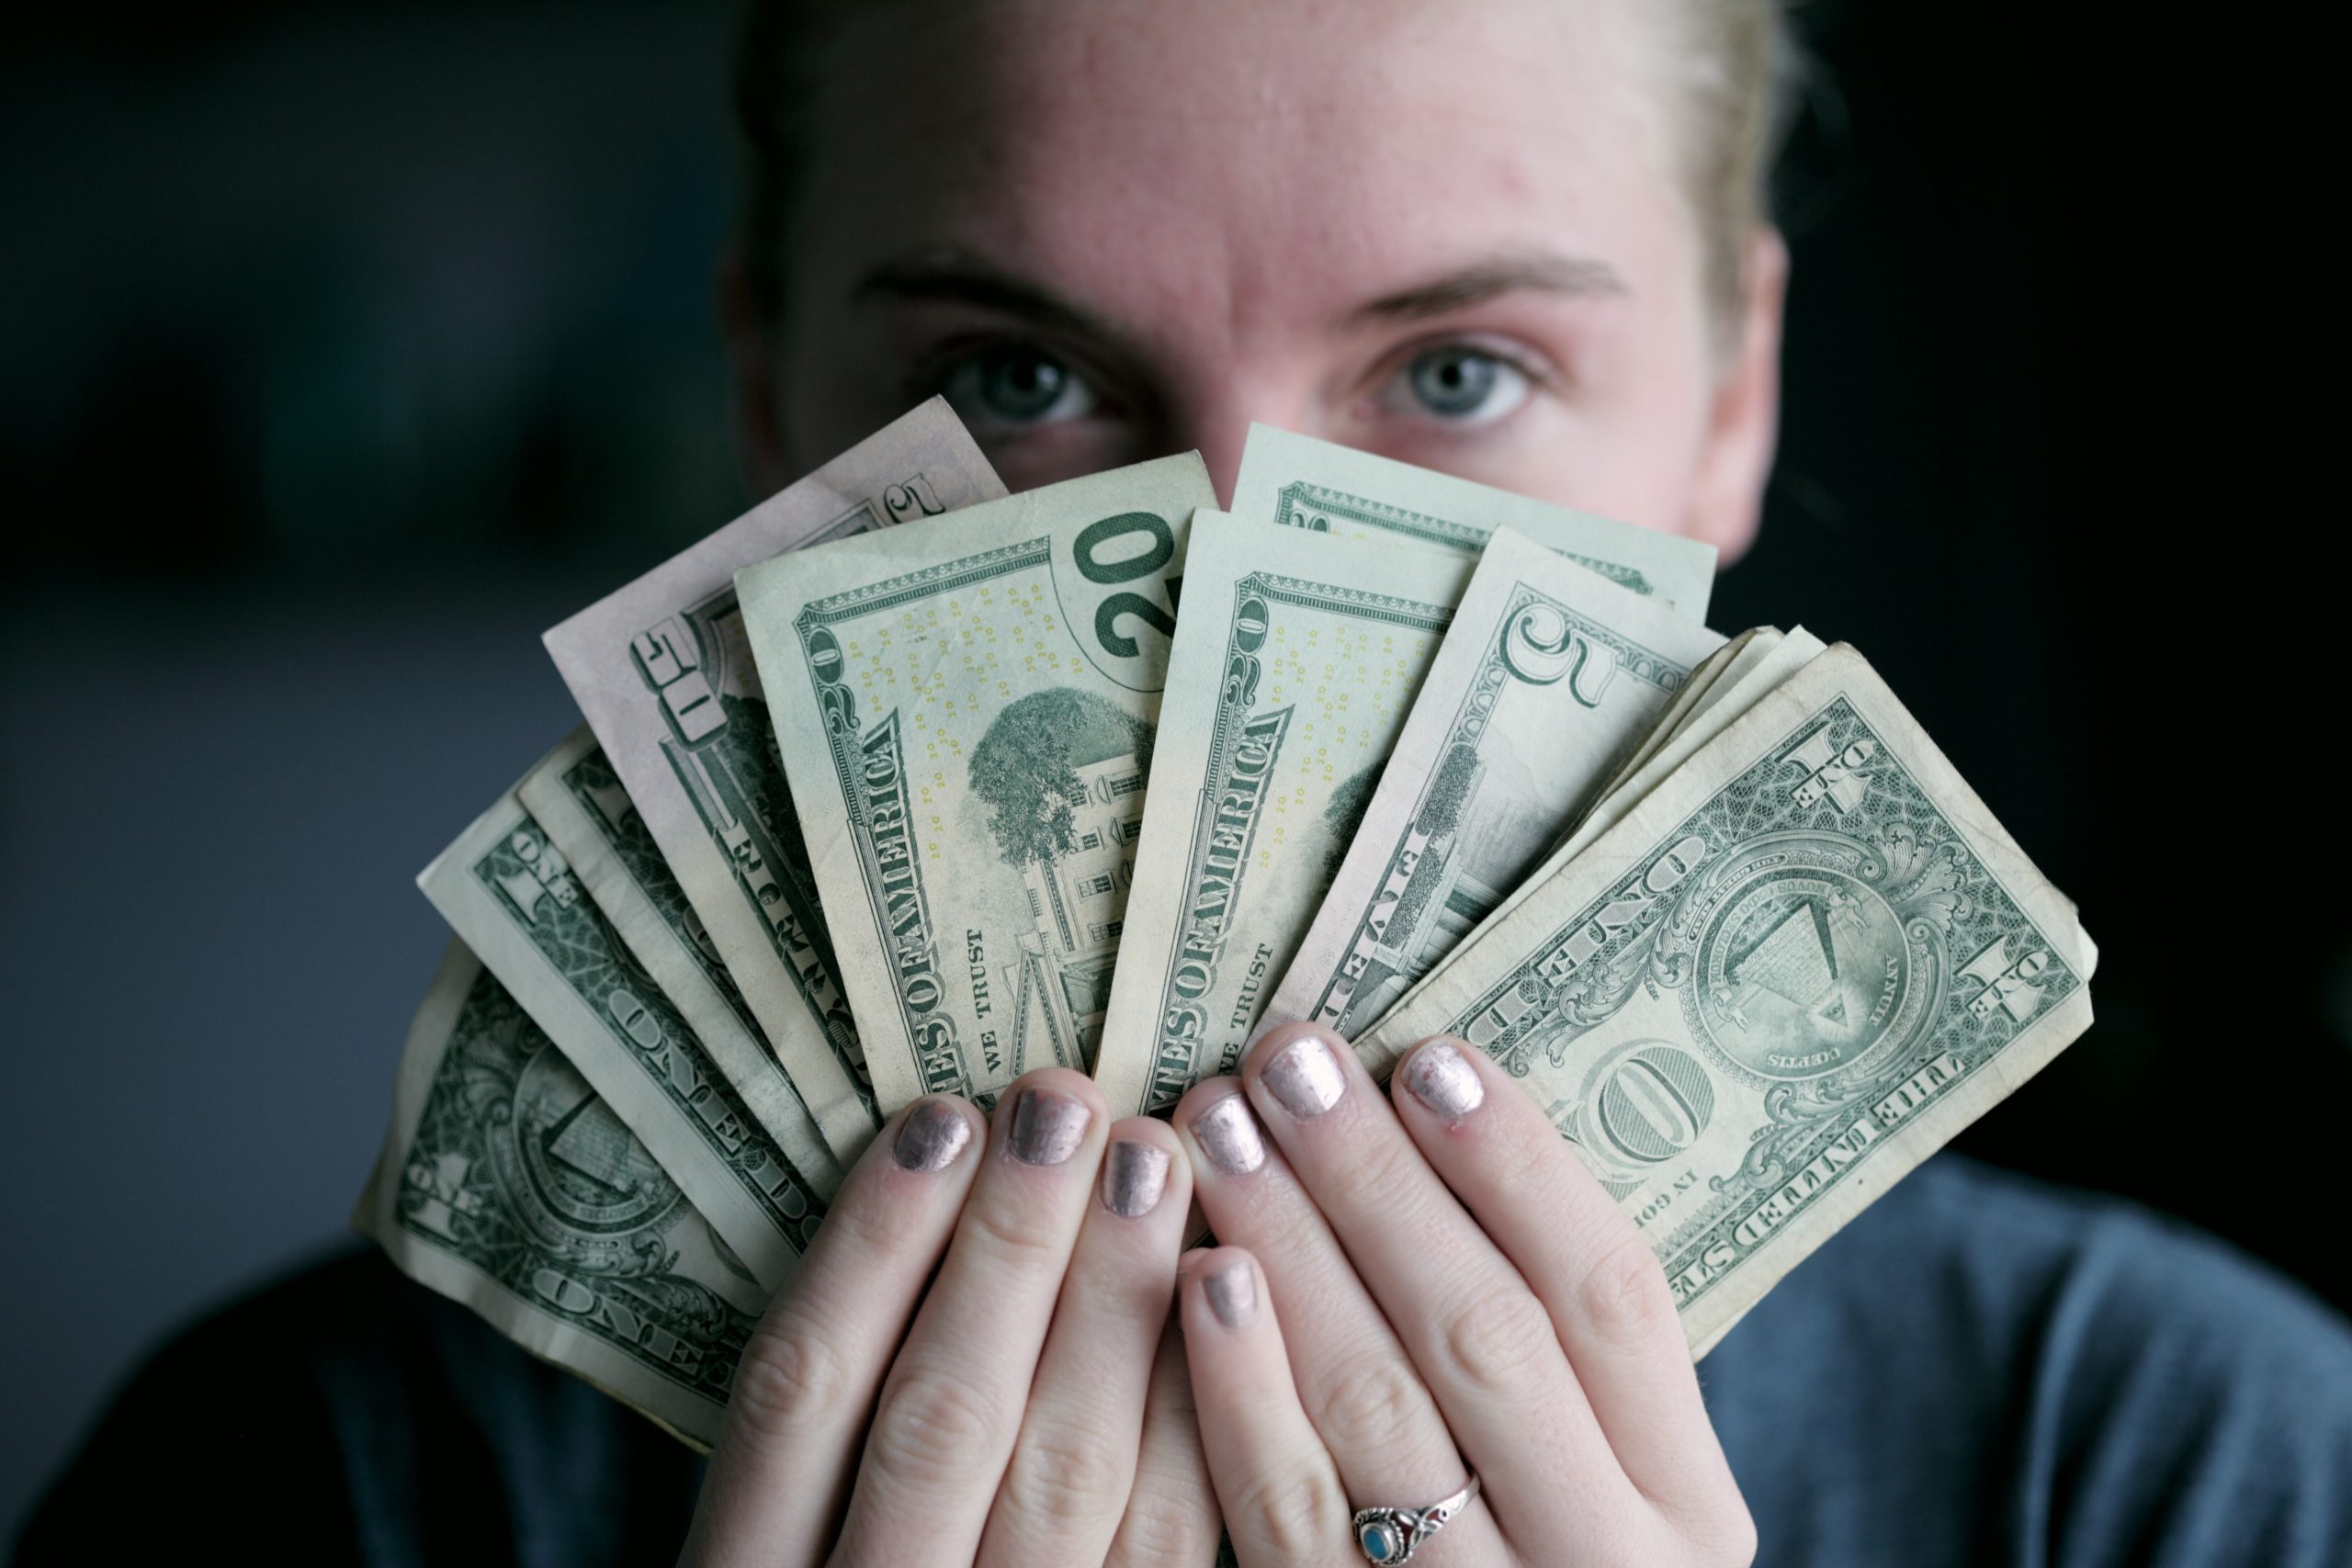 Person holding money - ROI from paying a fair living wage - Photo by Sharon McCutcheon on Unsplash